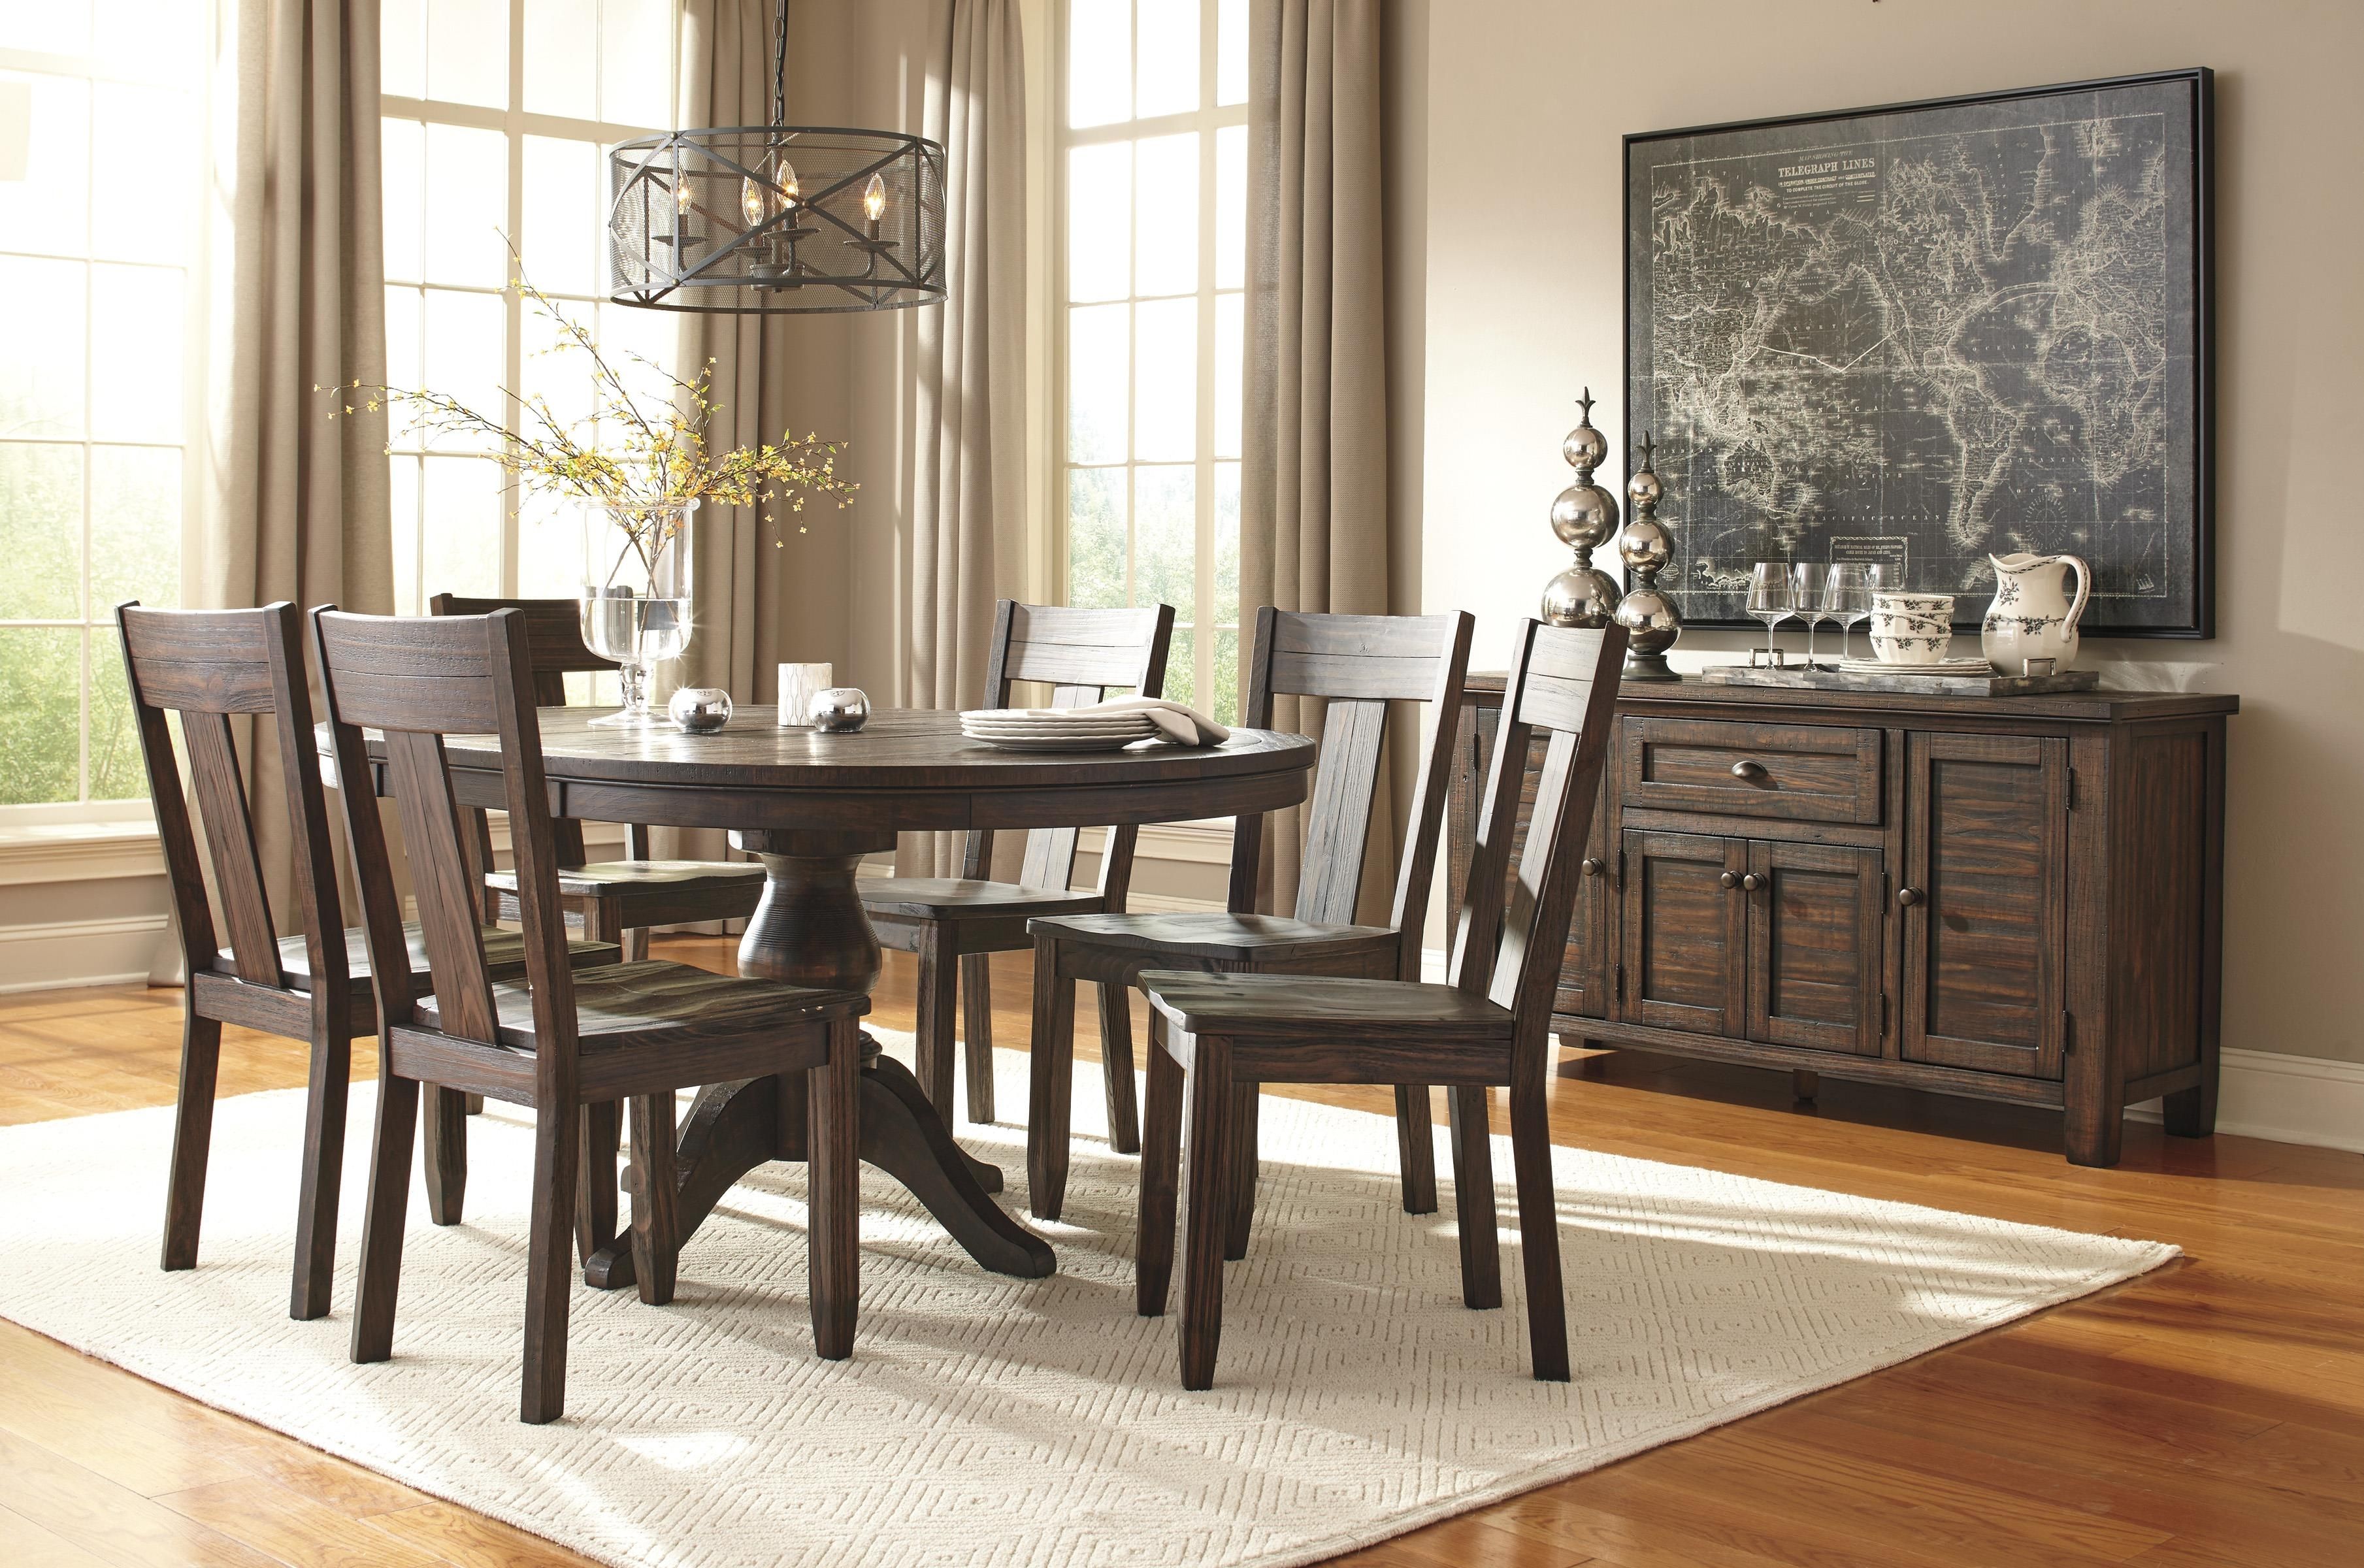 7 Piece Oval Dining Table Set With Wood Seat Side Chairs Regarding Most Popular Craftsman 7 Piece Rectangle Extension Dining Sets With Uph Side Chairs (View 11 of 20)